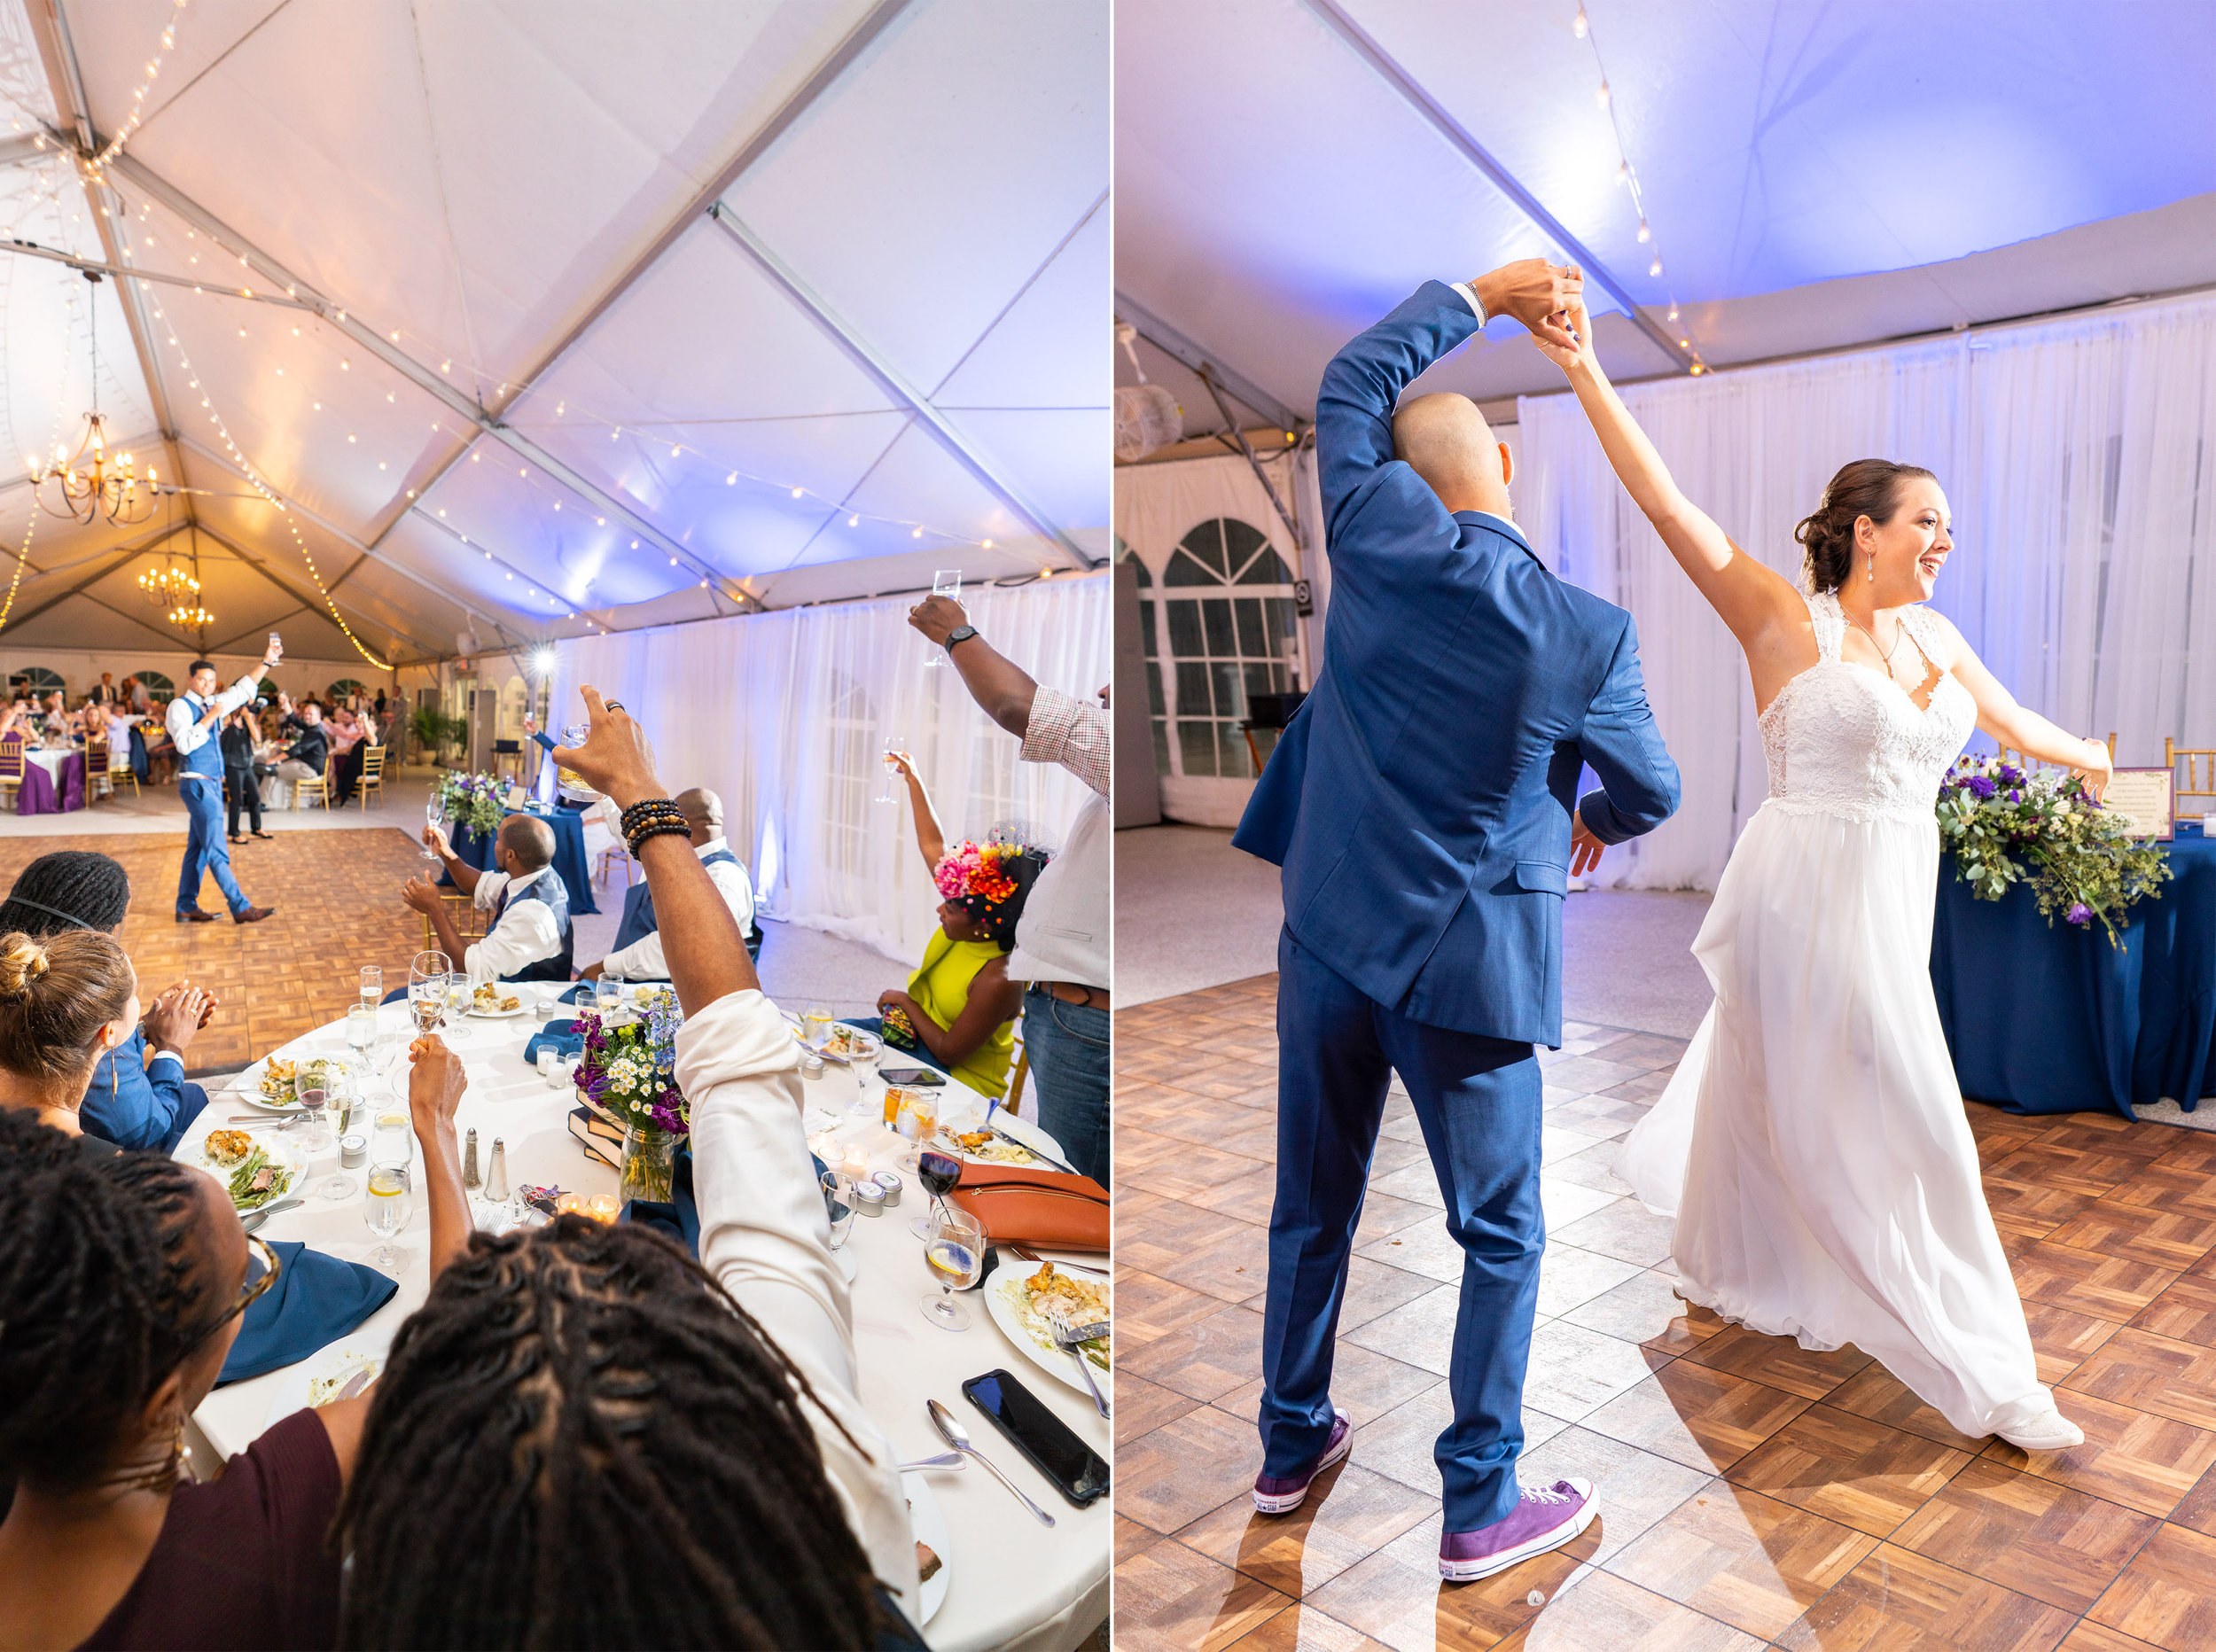 Toasts (left) and first dance (right) at rust manor house reception tent